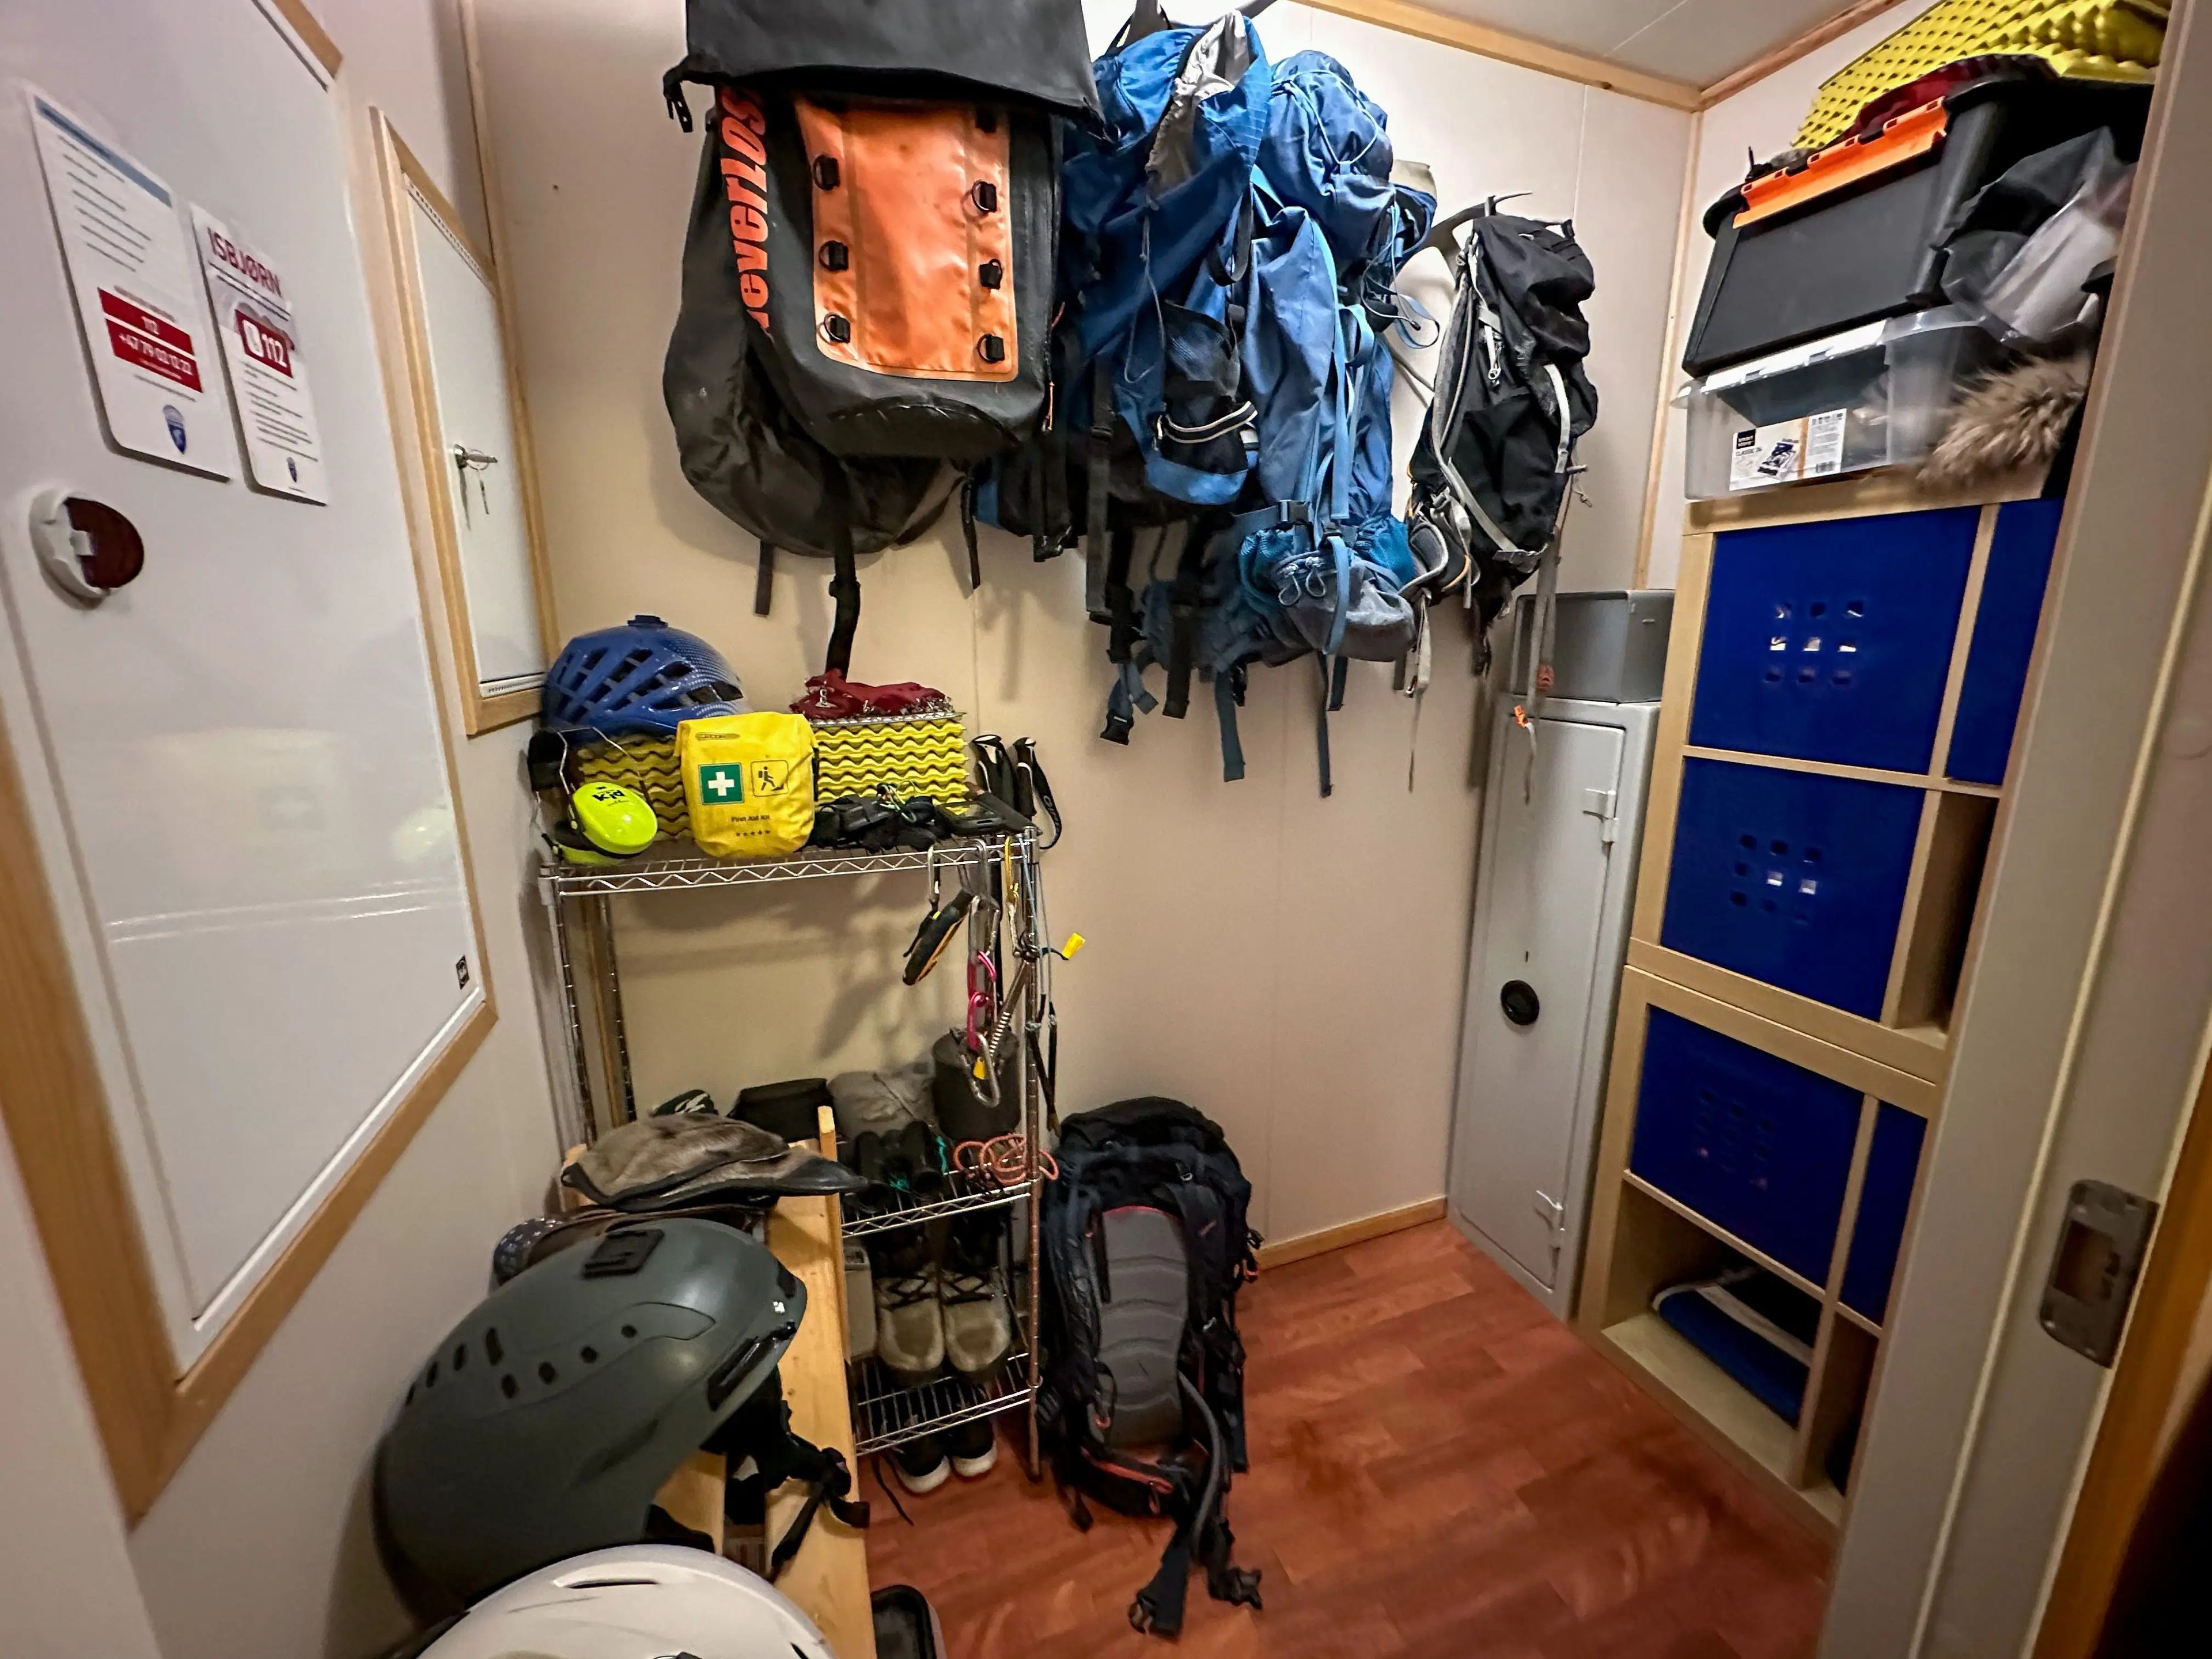 The writer's gear room, which contains backpacks, helmets, rope, and a first-aid kit